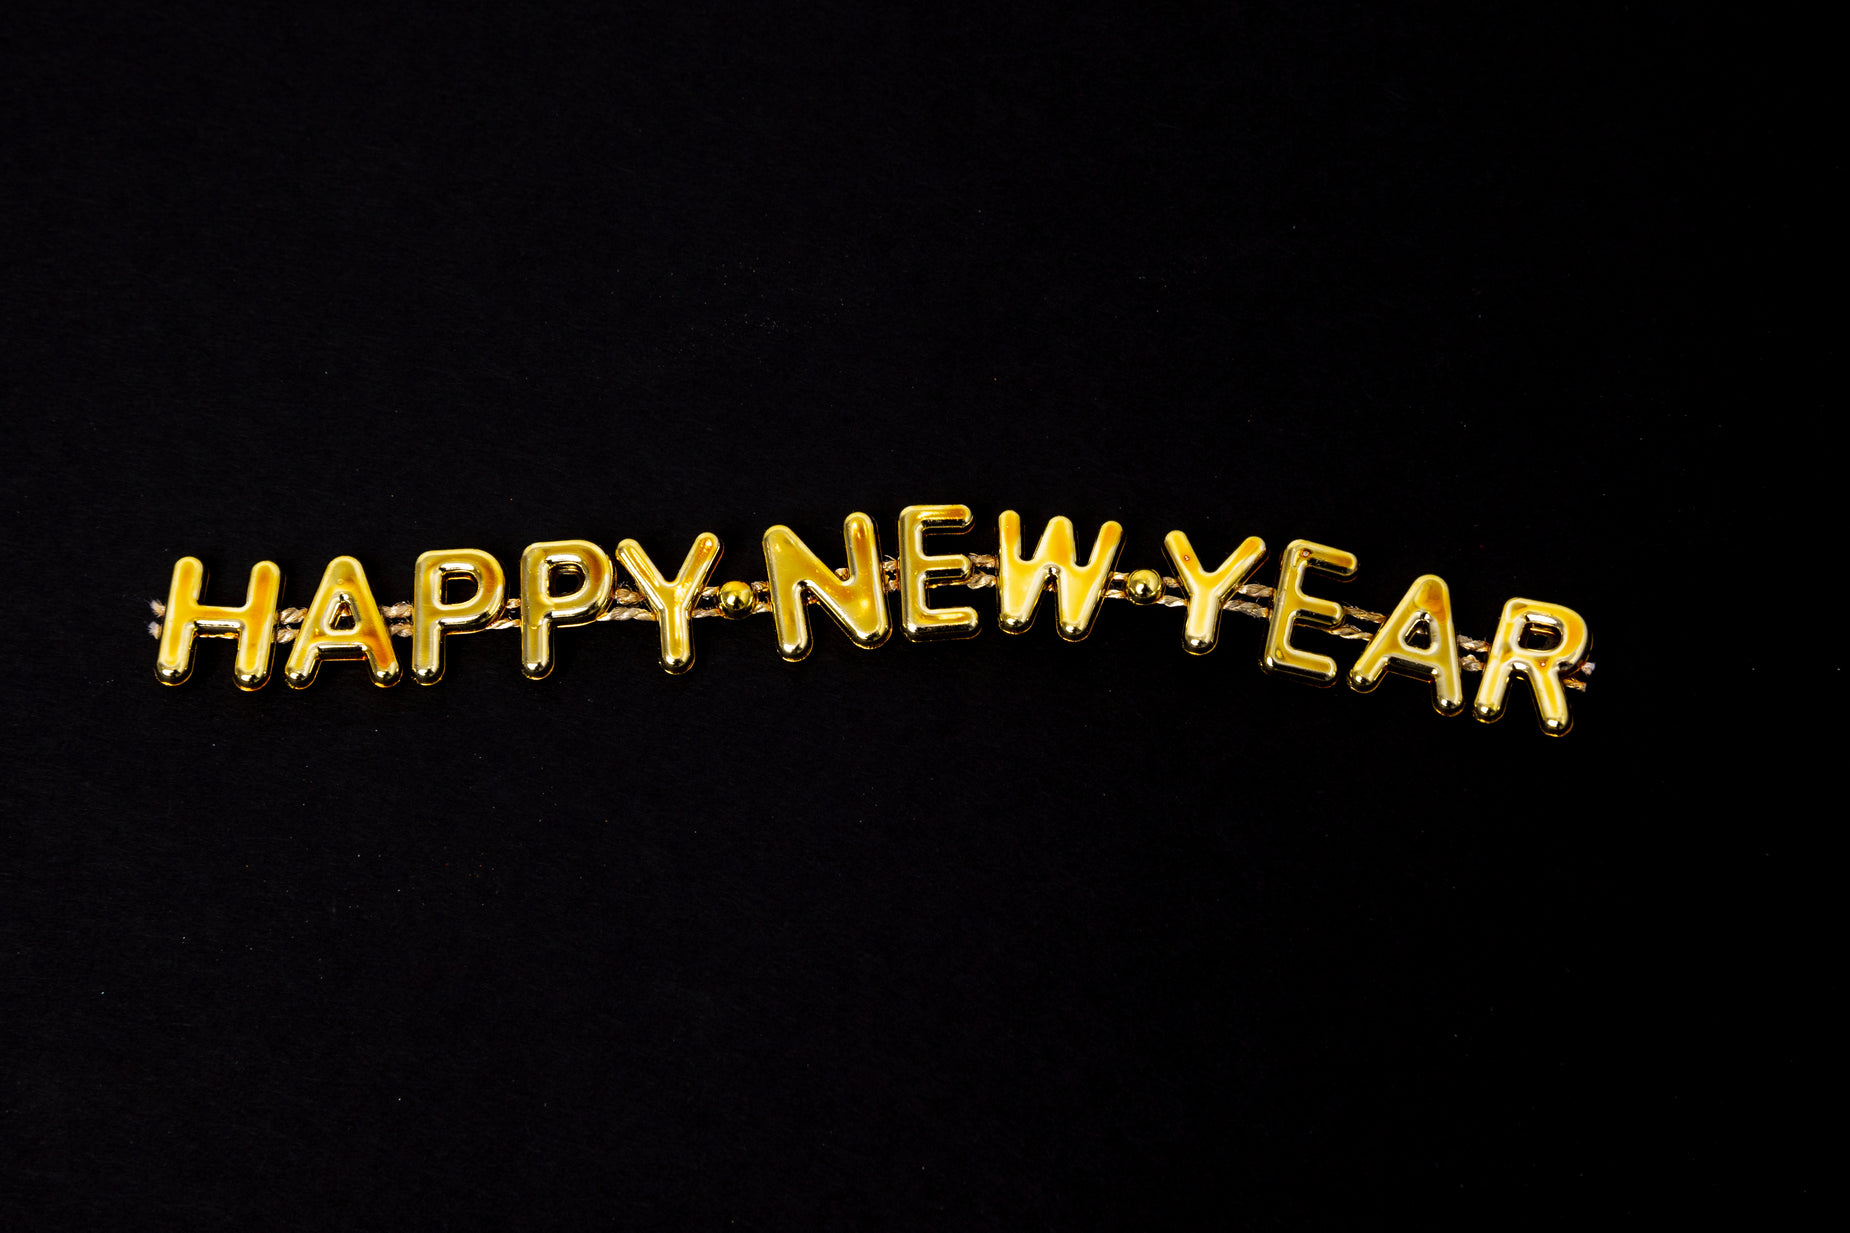 a happy new year message against a dark background